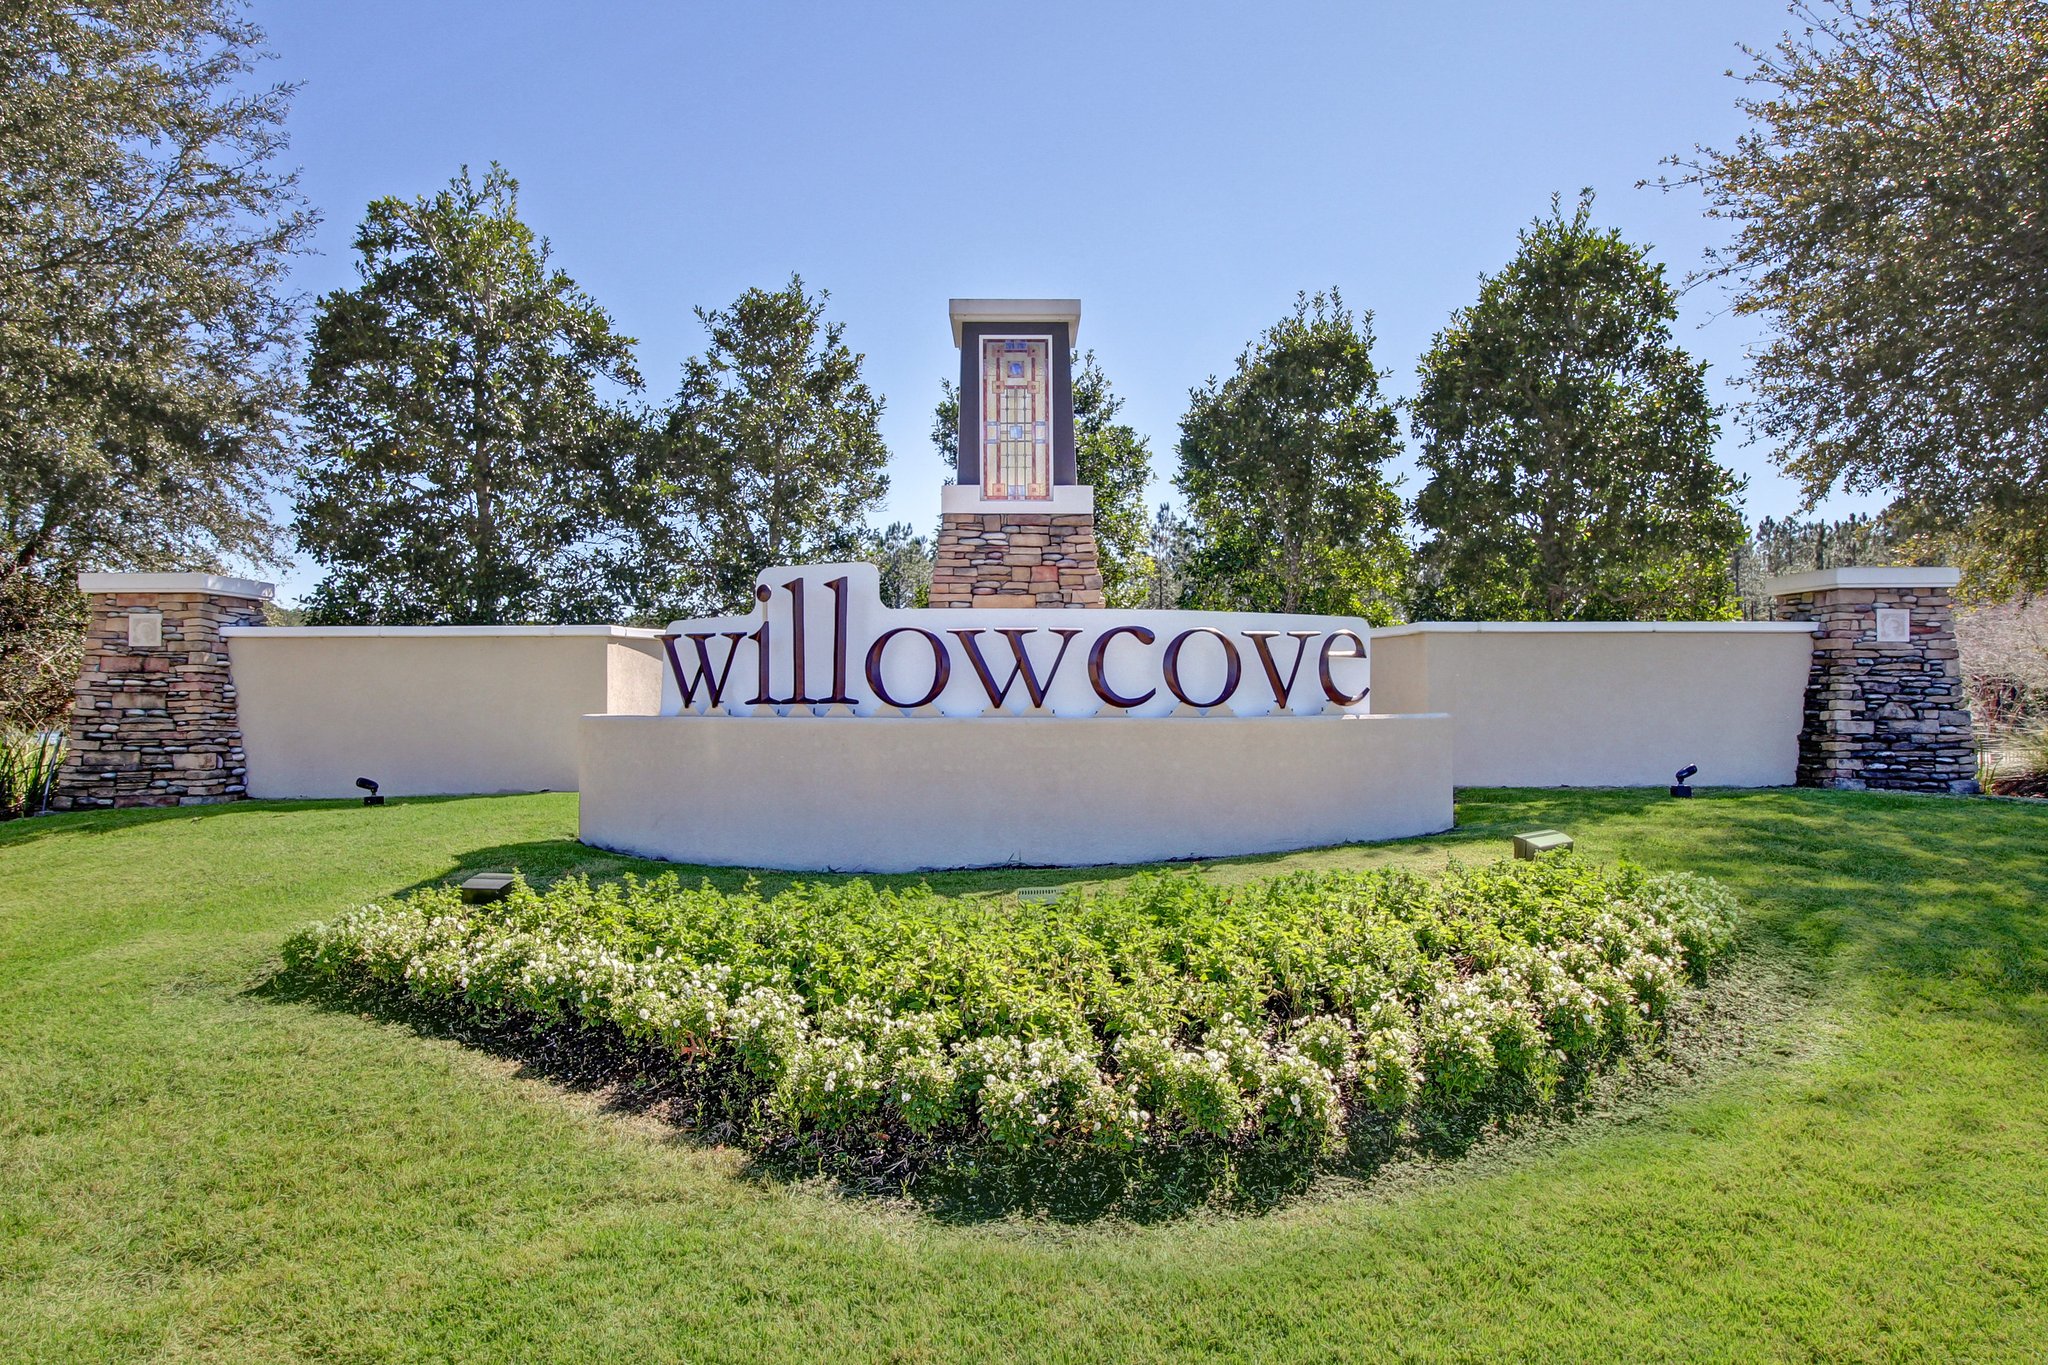 Willow Cove